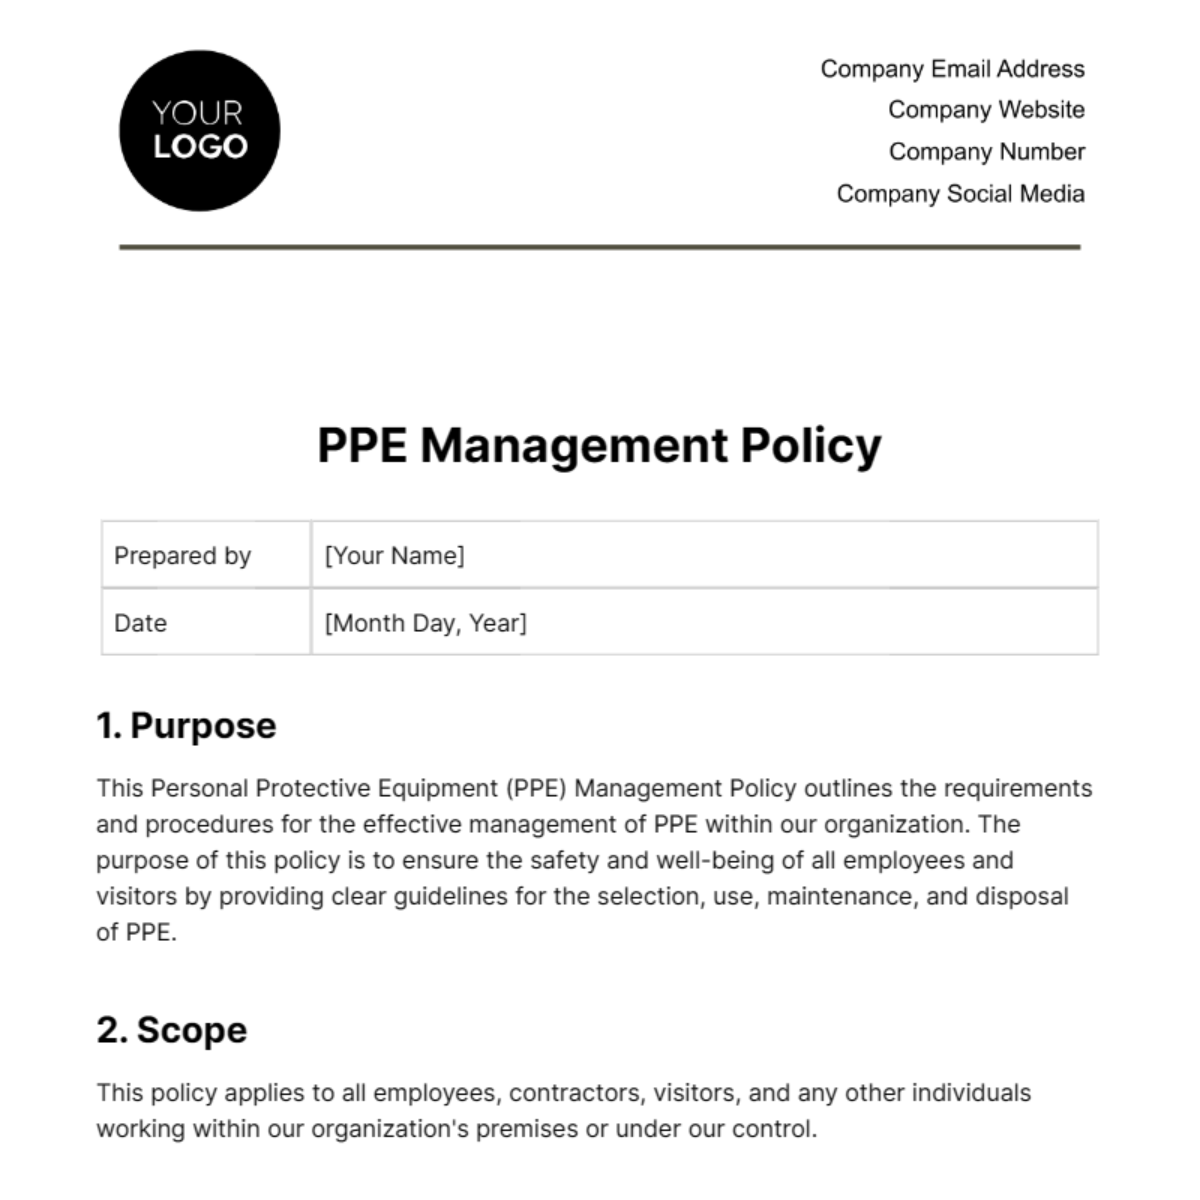 PPE Management Policy Template